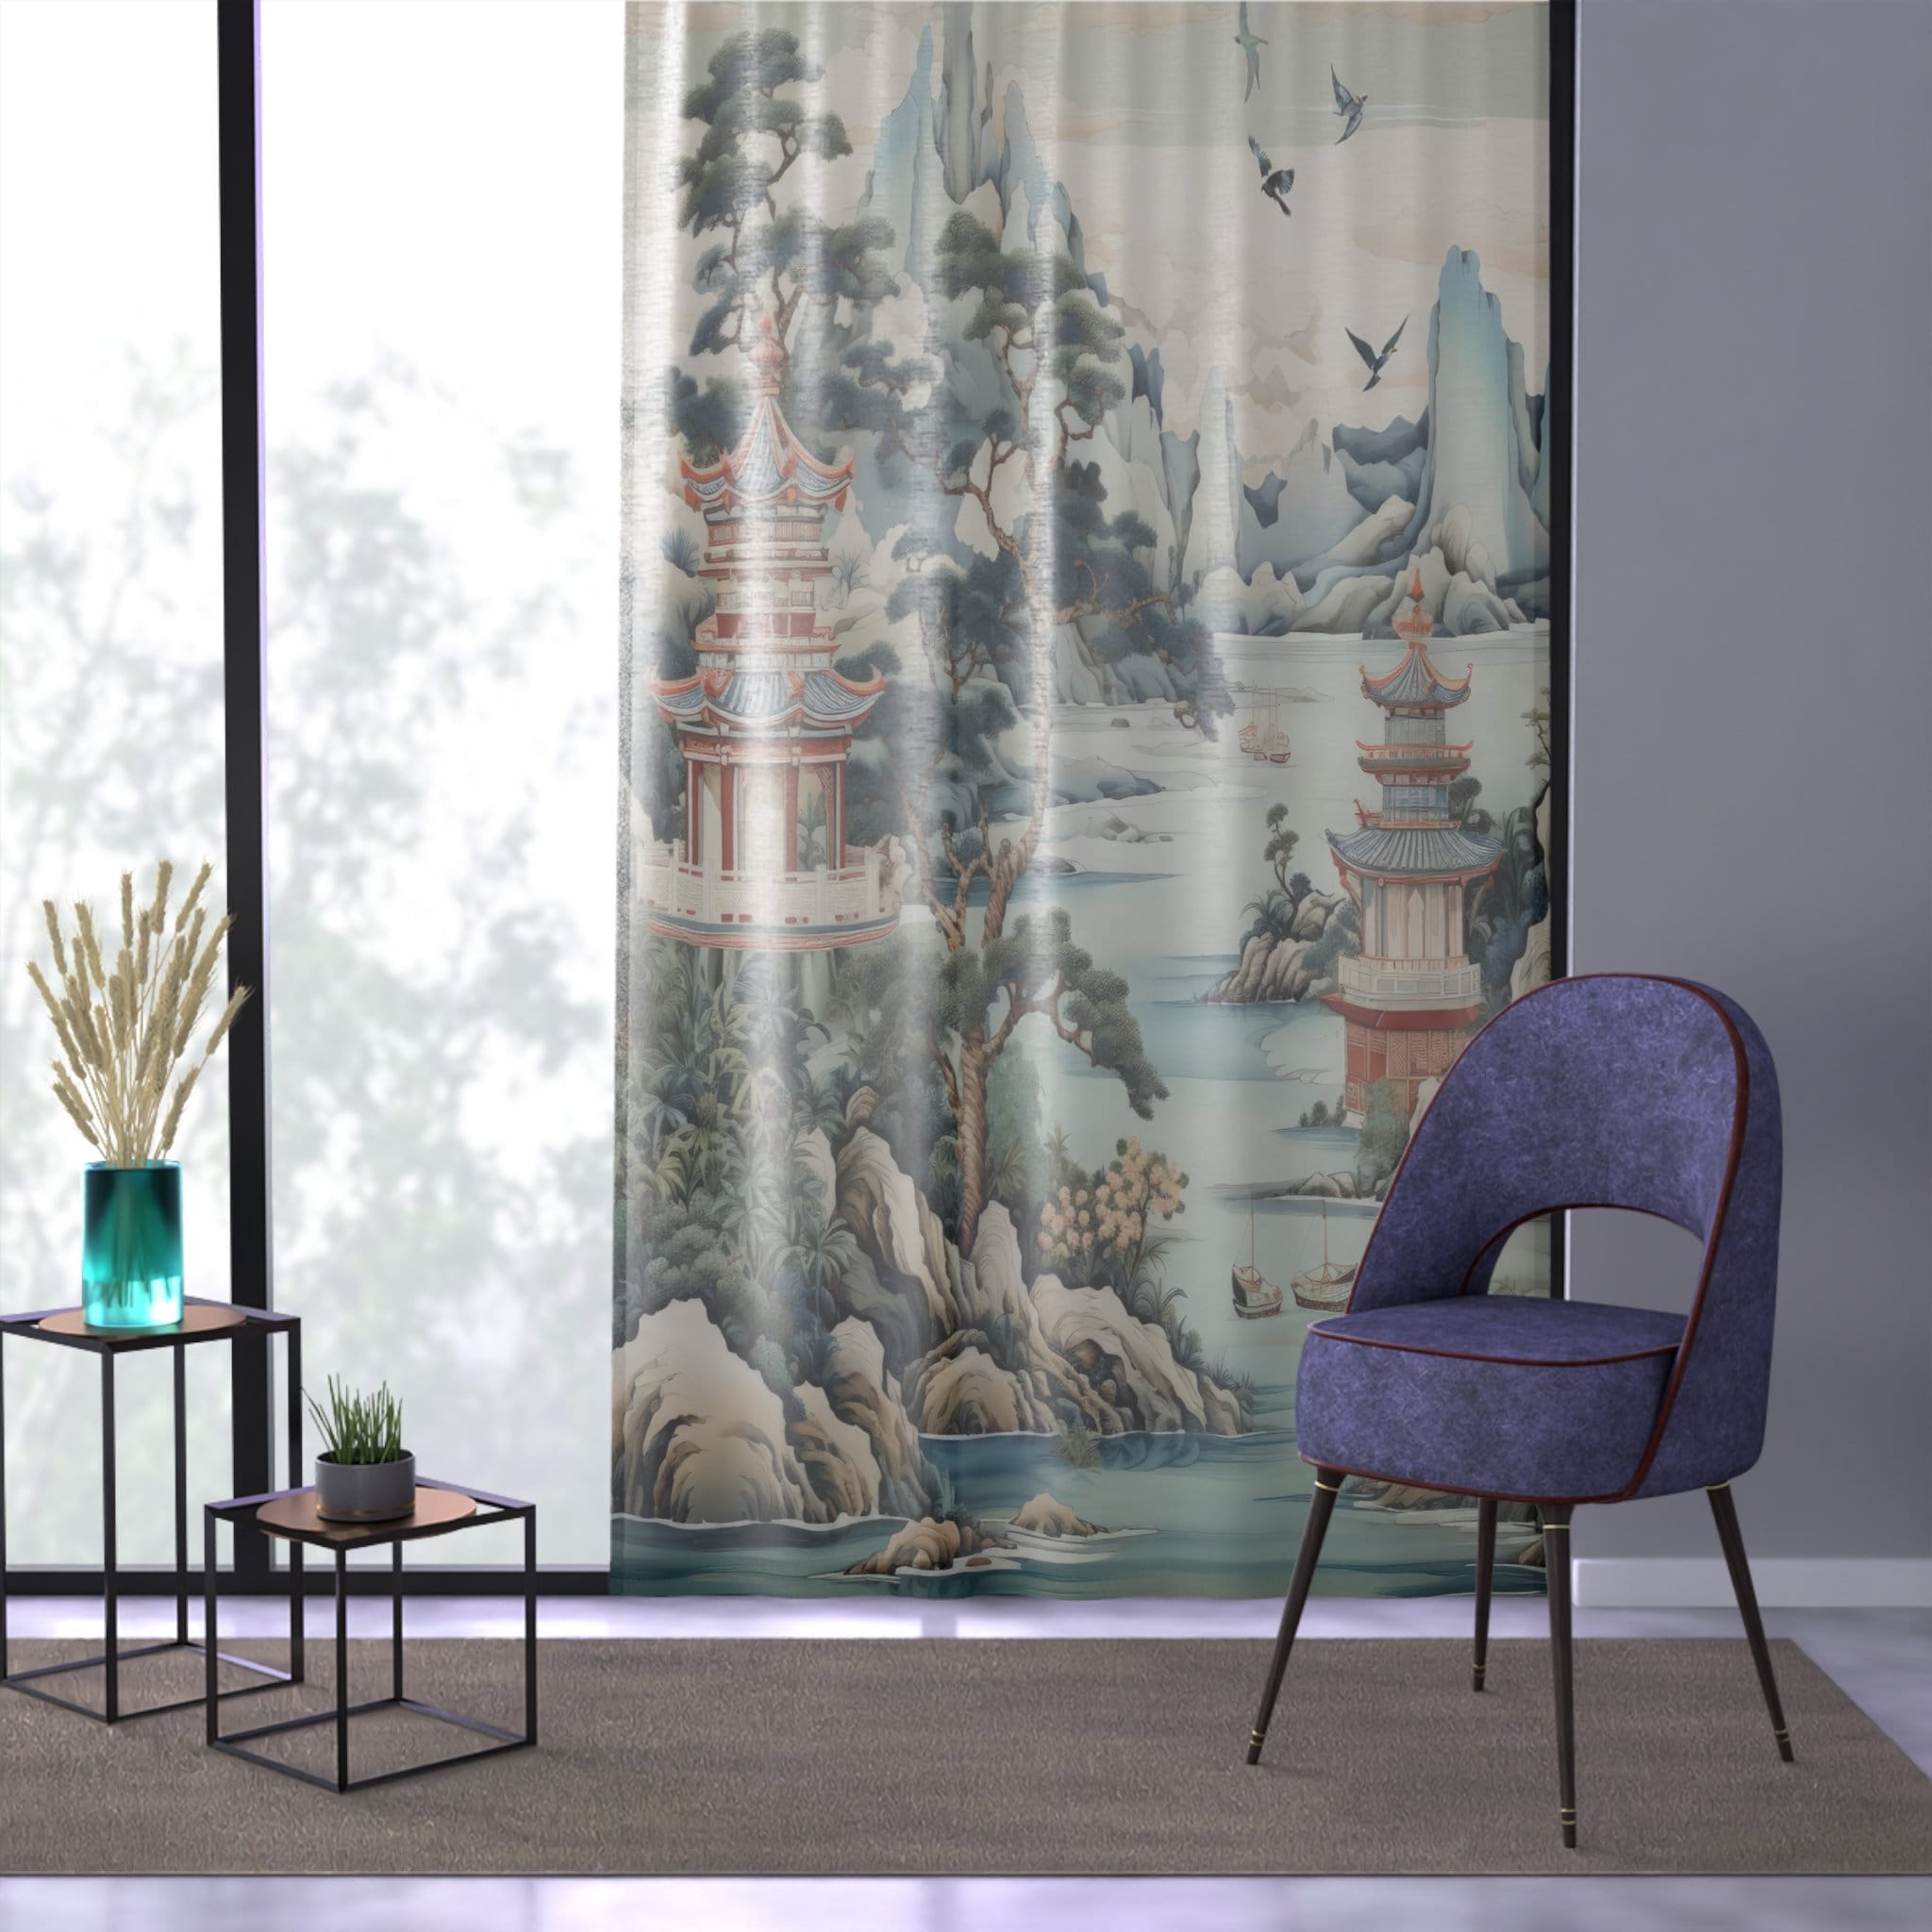 Kate McEnroe New York Chinoiserie Pagoda Landscape Floral Window Curtains, Country Farmhouse Grandmillenial Decor, Asian Country Scene Curtain Panels - 121081023 Window Curtains